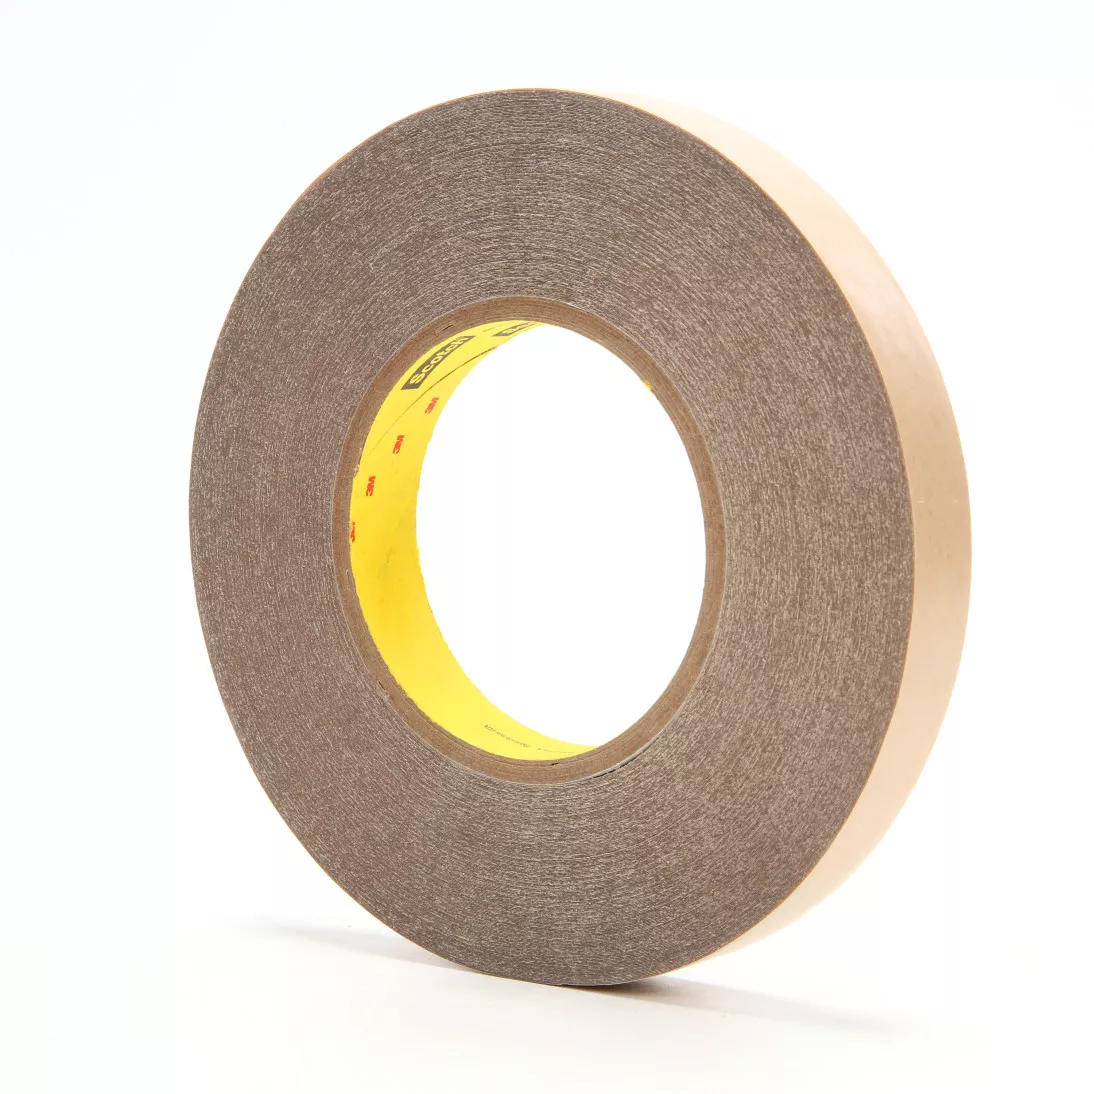 3M™ Adhesive Transfer Tape 9485PC, Clear, 3/4 in x 60 yd, 5 mil, 48
rolls per case